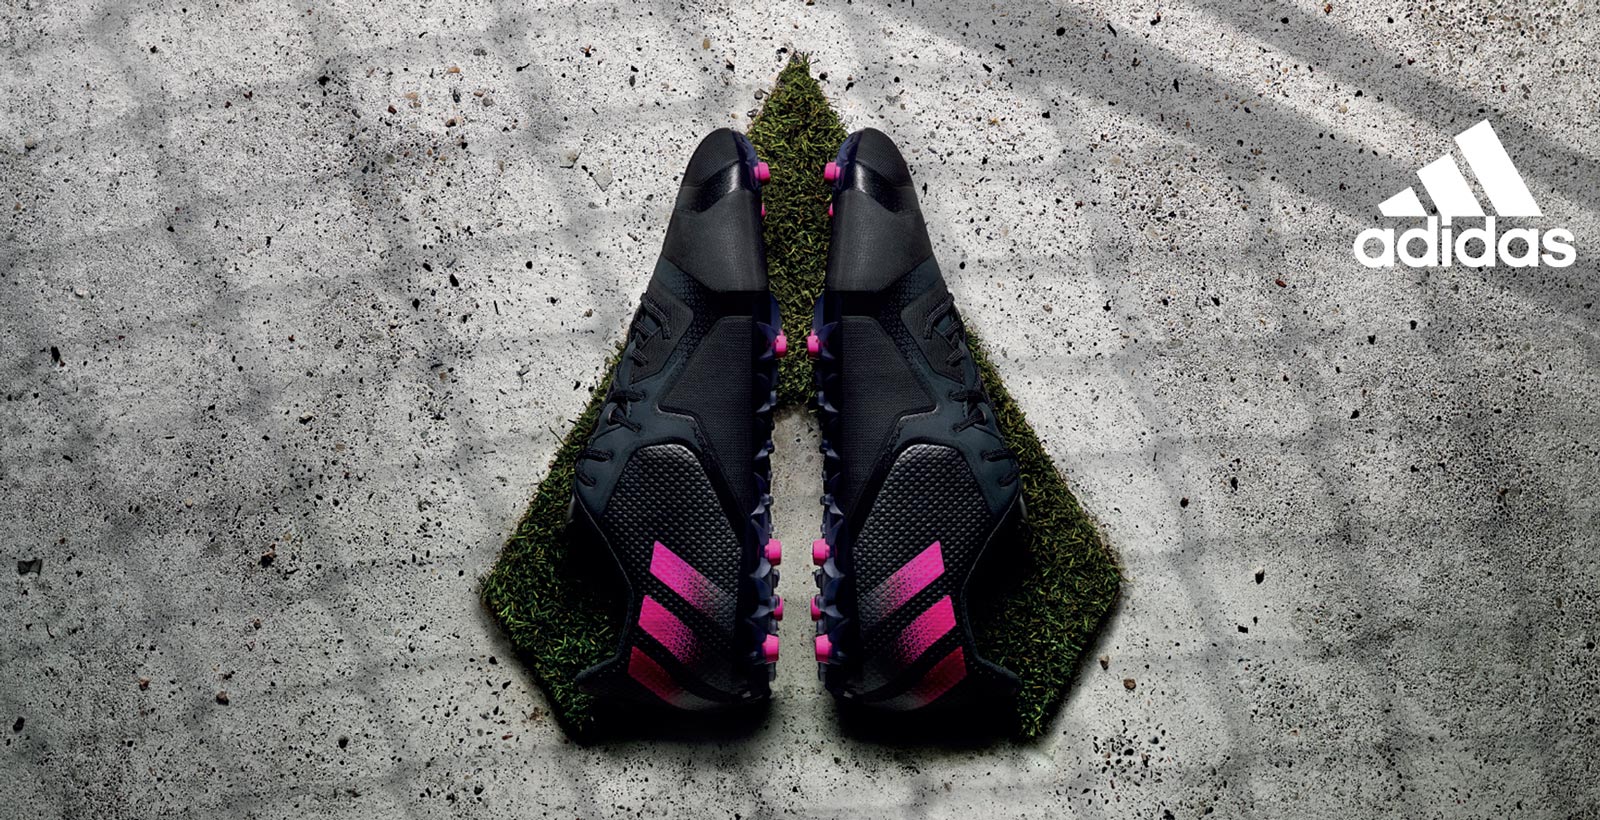 Totally New Adidas Ace Tekkers Boots Released - Footy Headlines